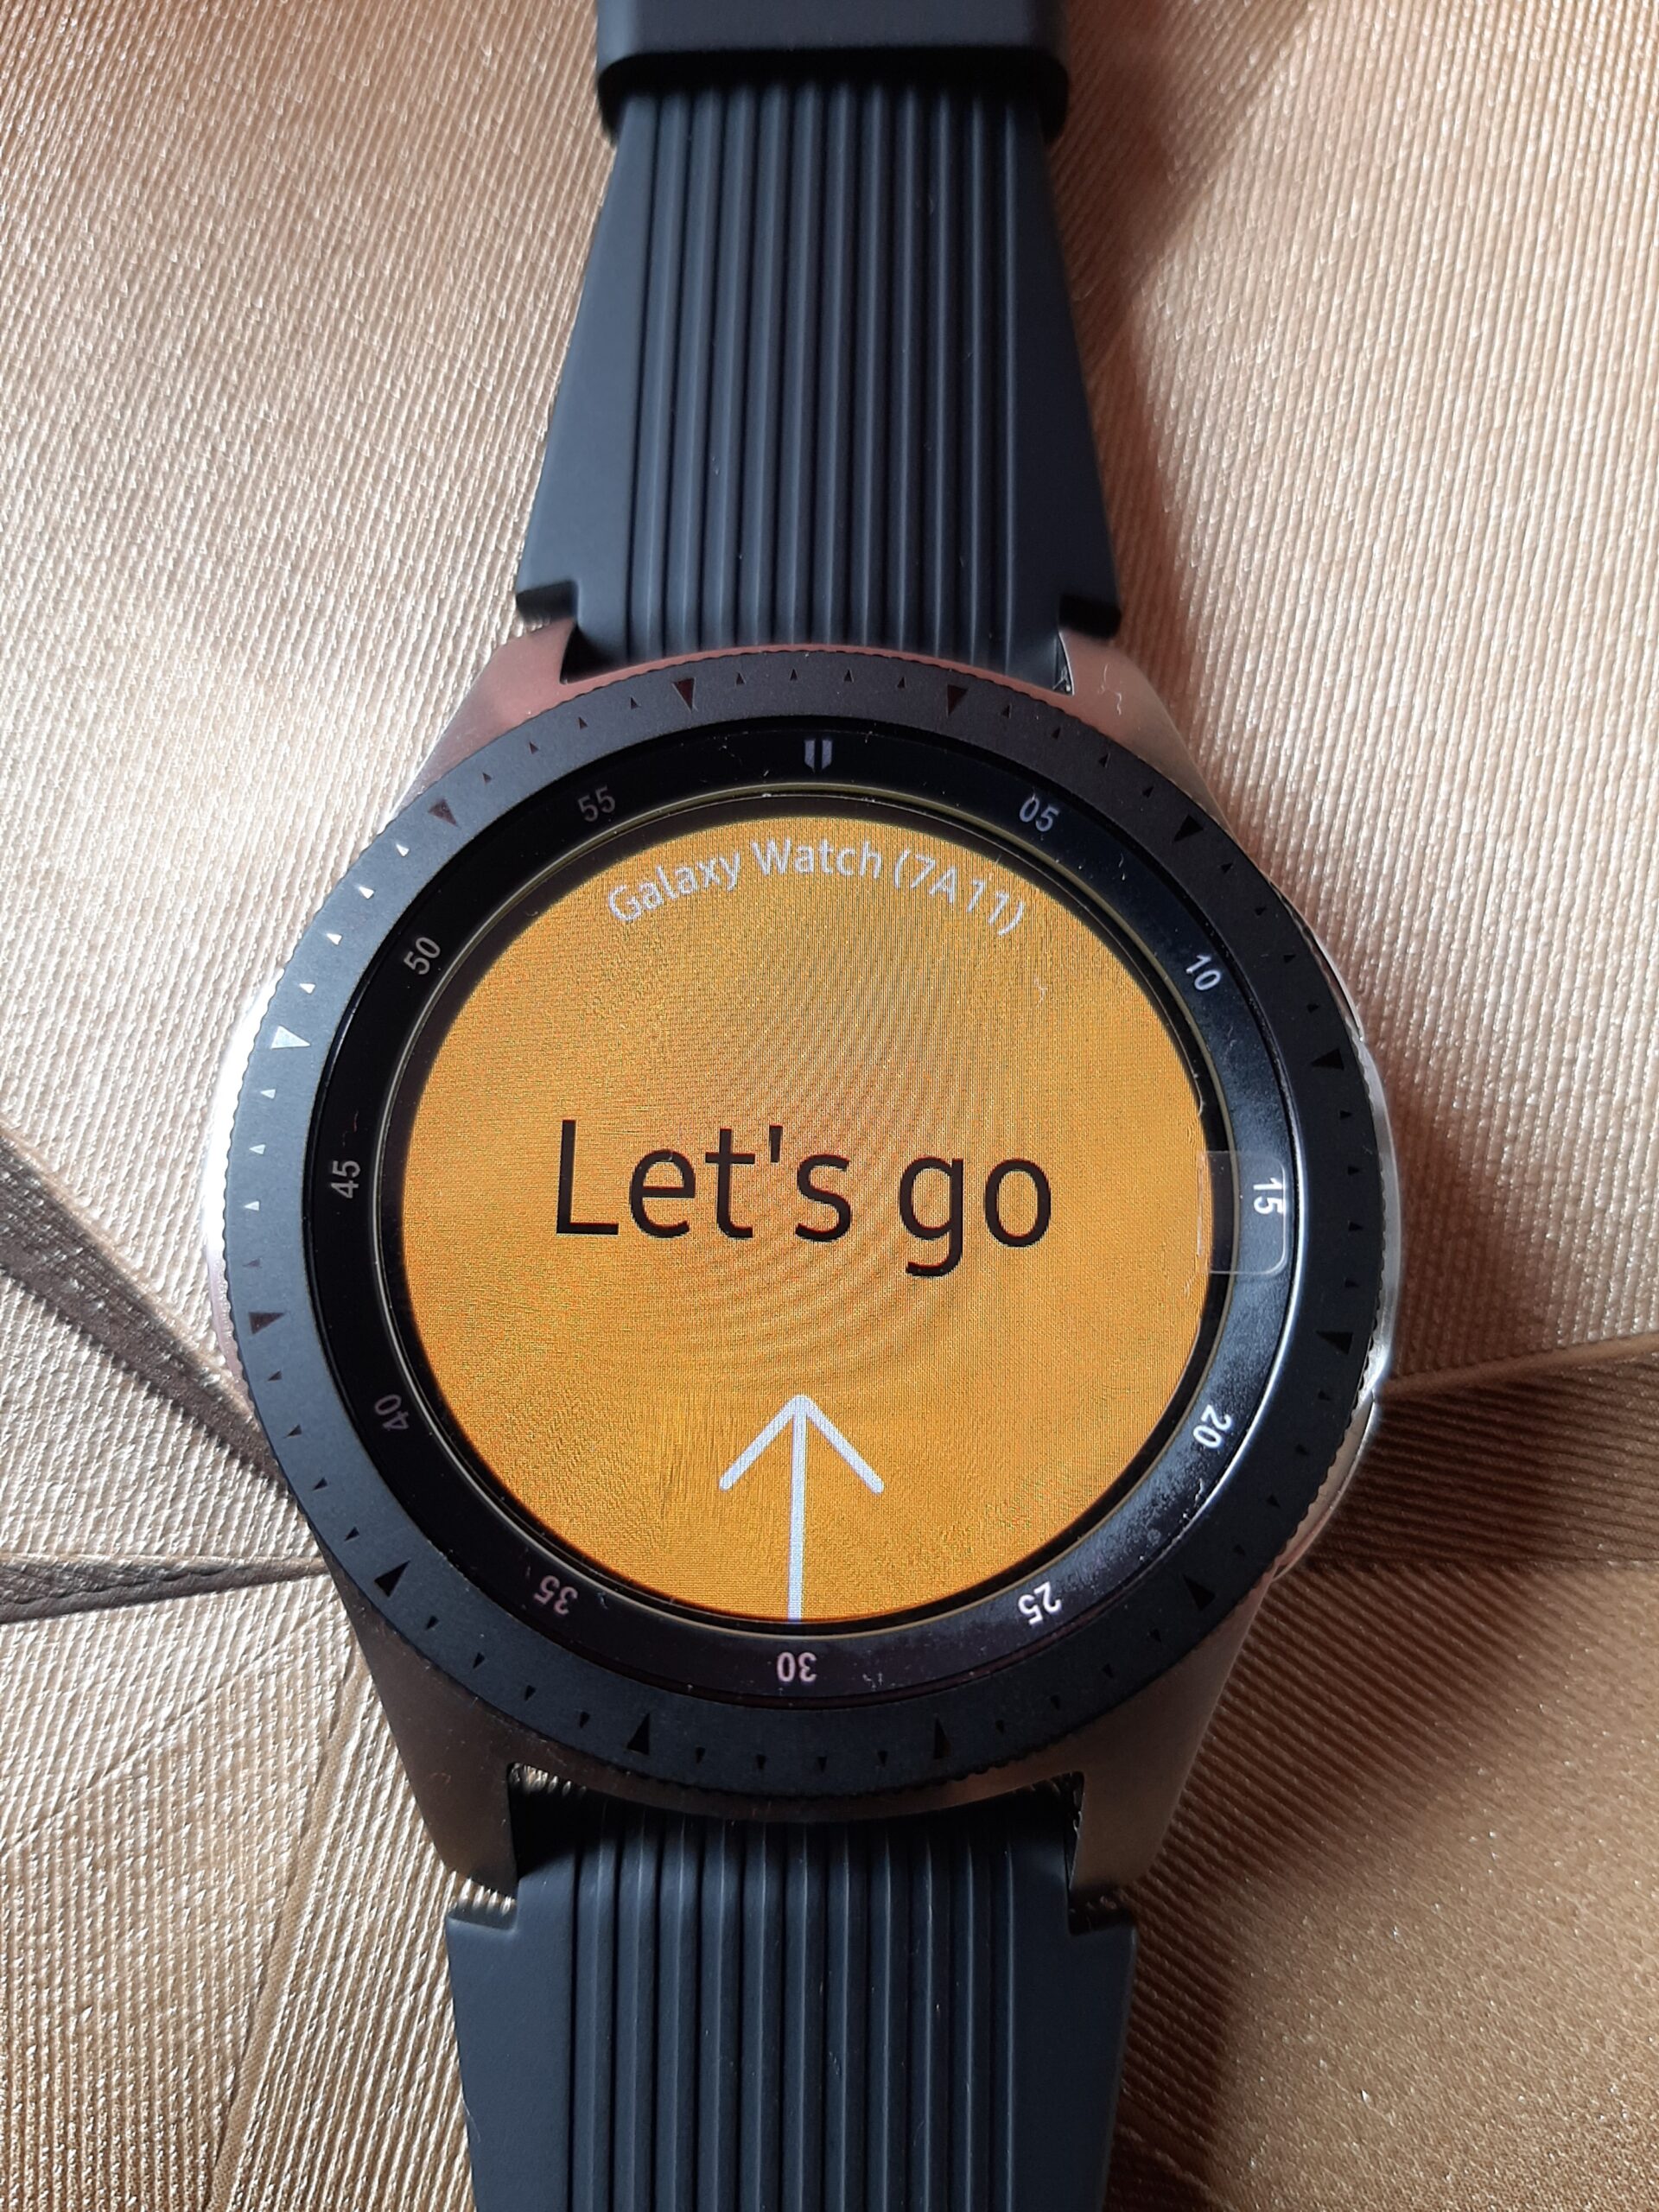 How to Setup Samsung Galaxy Watch To Work With Your Phone